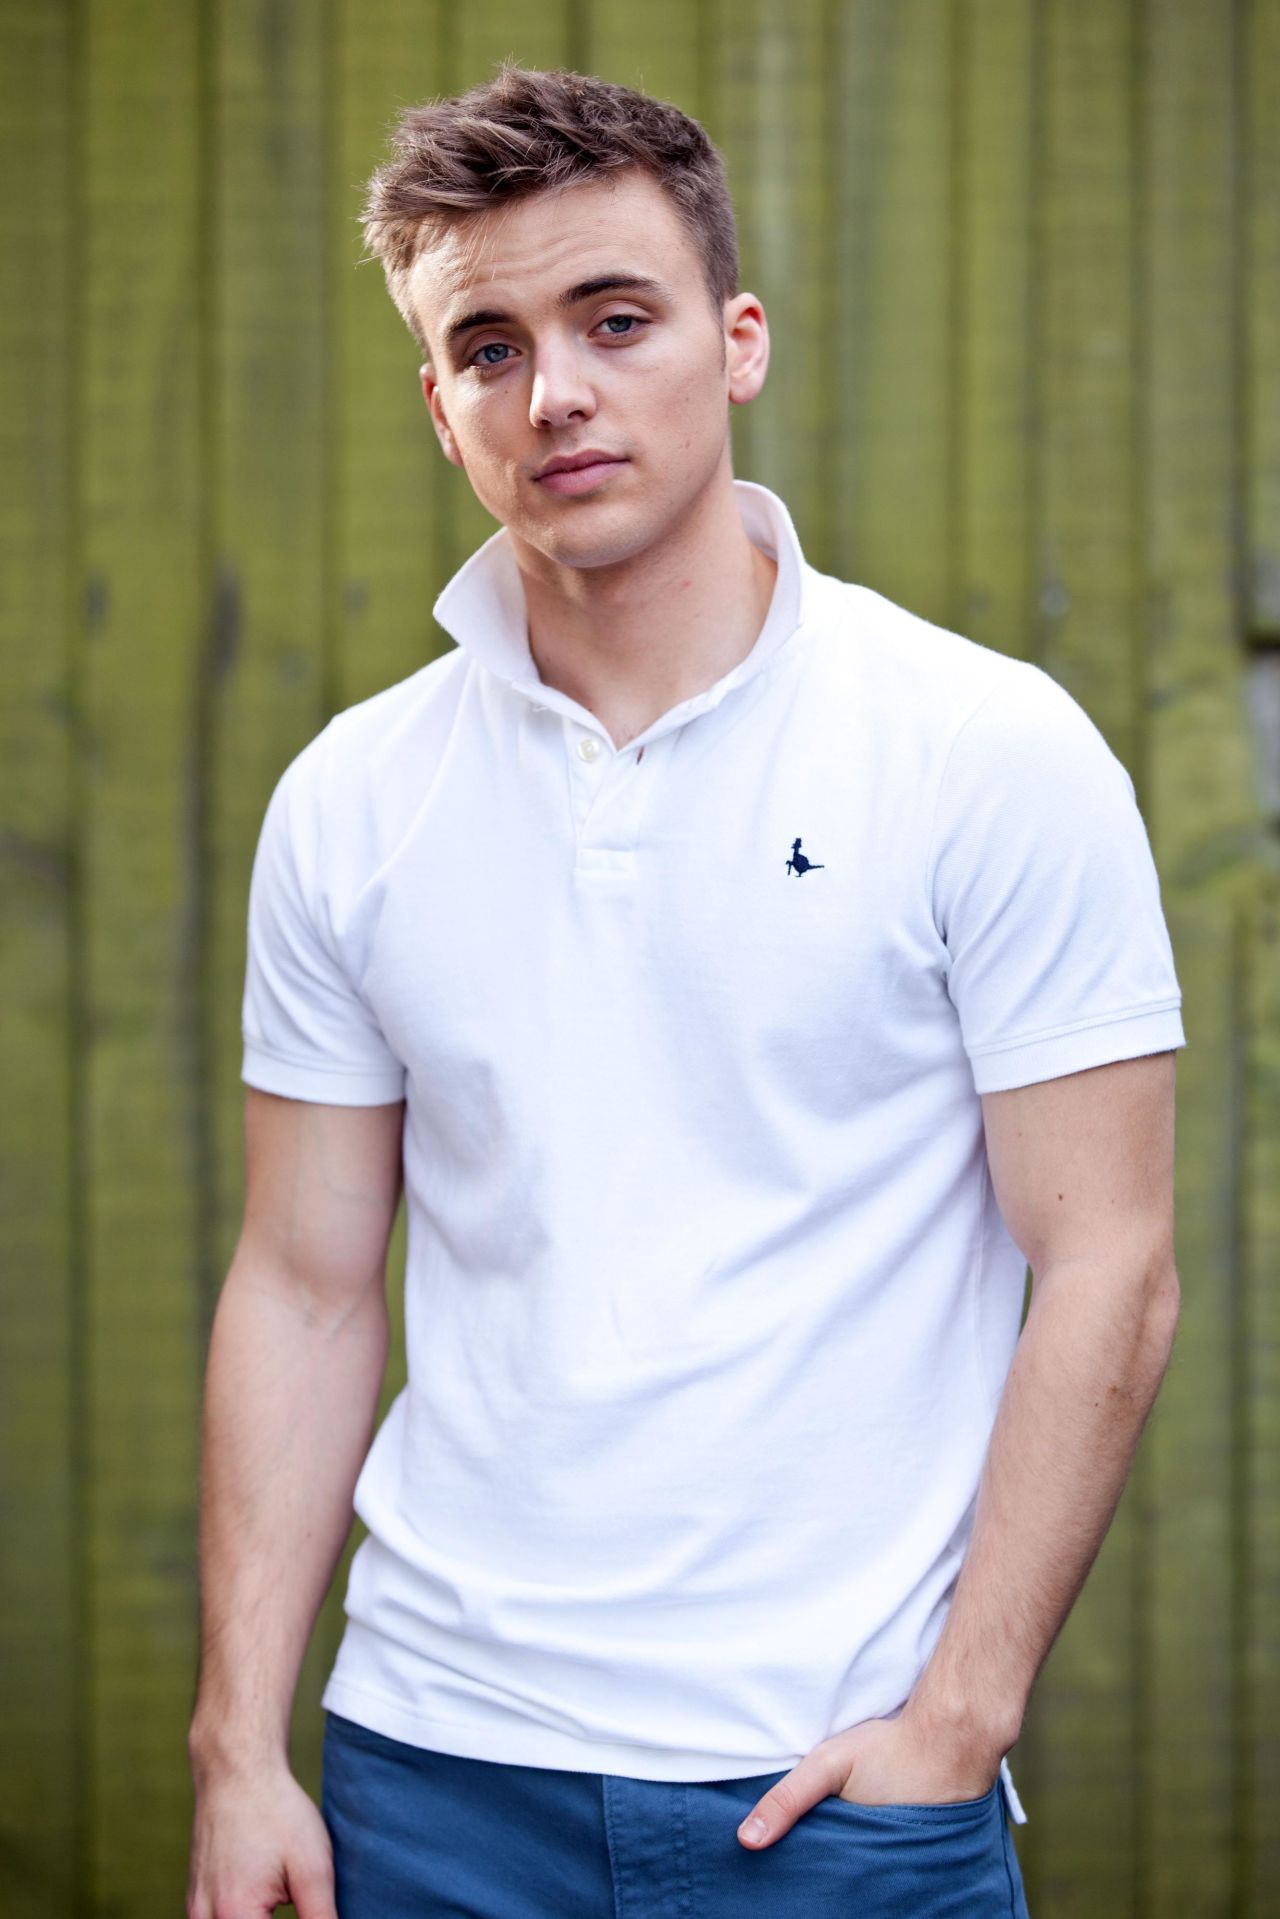 gallery-soaps-hollyoaks-parry-glasspool-harry-thompson-2